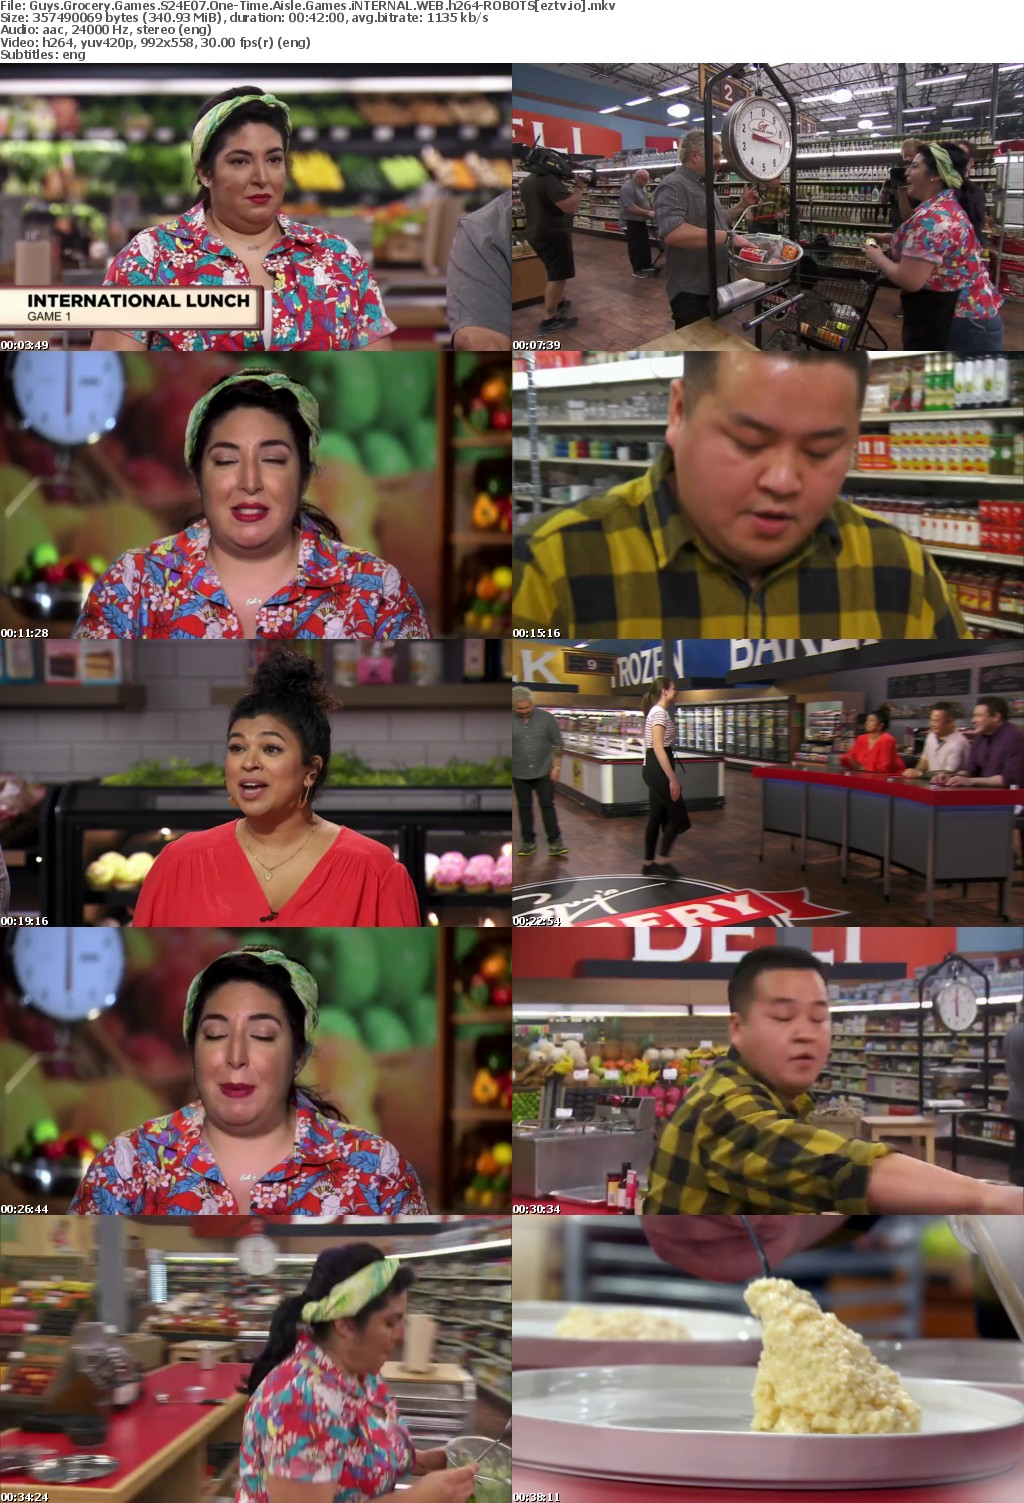 Guys Grocery Games S24E07 One-Time Aisle Games iNTERNAL WEB h264-ROBOTS